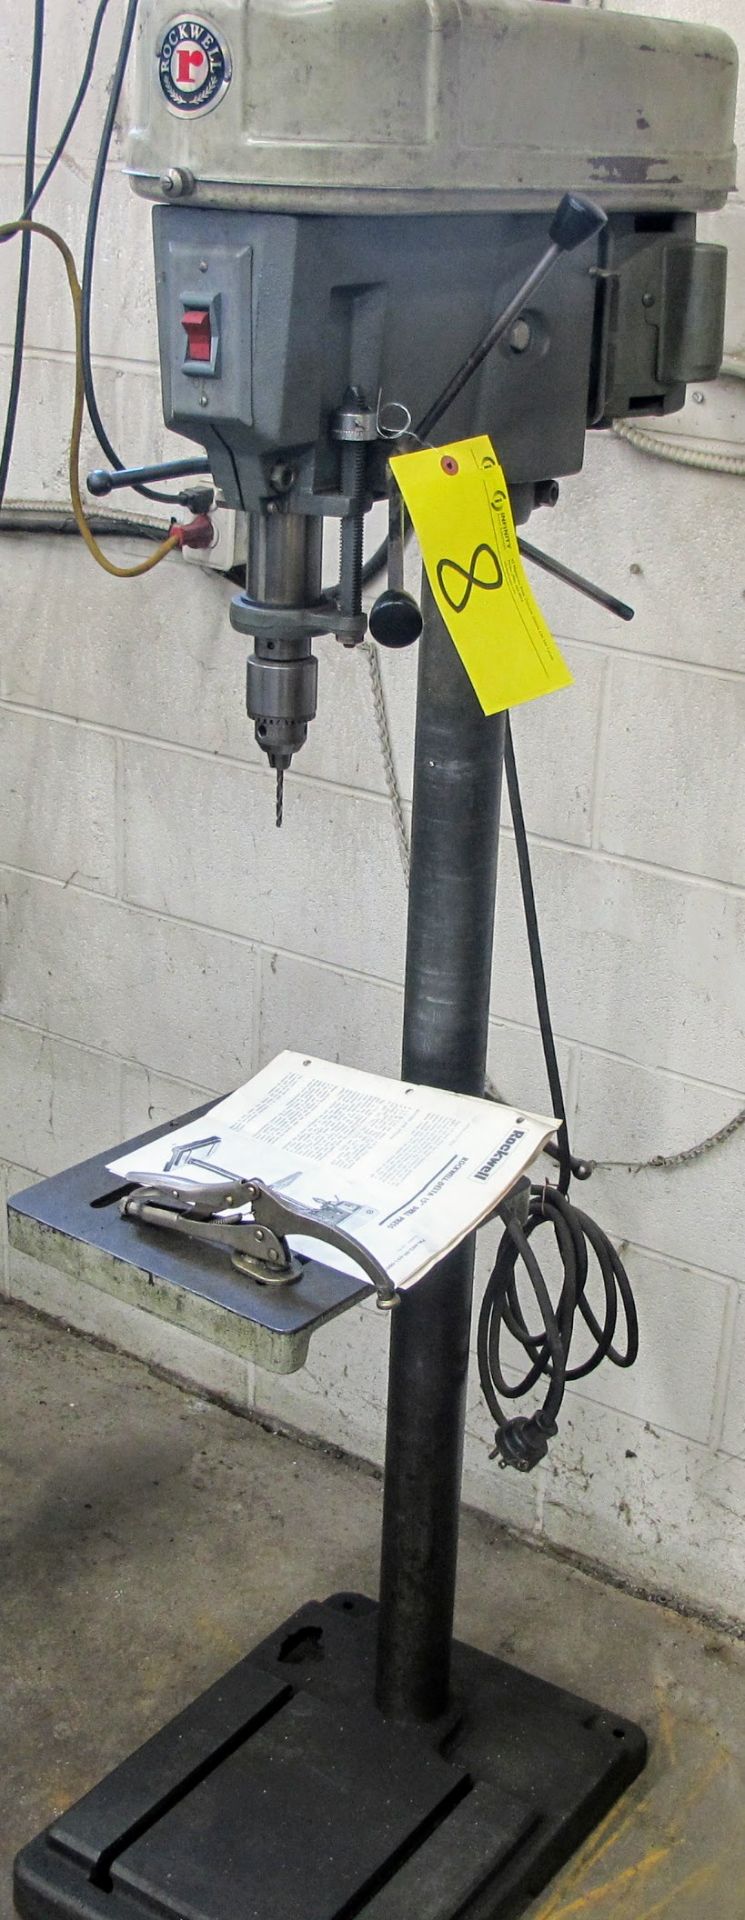 ROCKWELL 15-240 DRILL PRESS, 15", 110V - Image 2 of 4